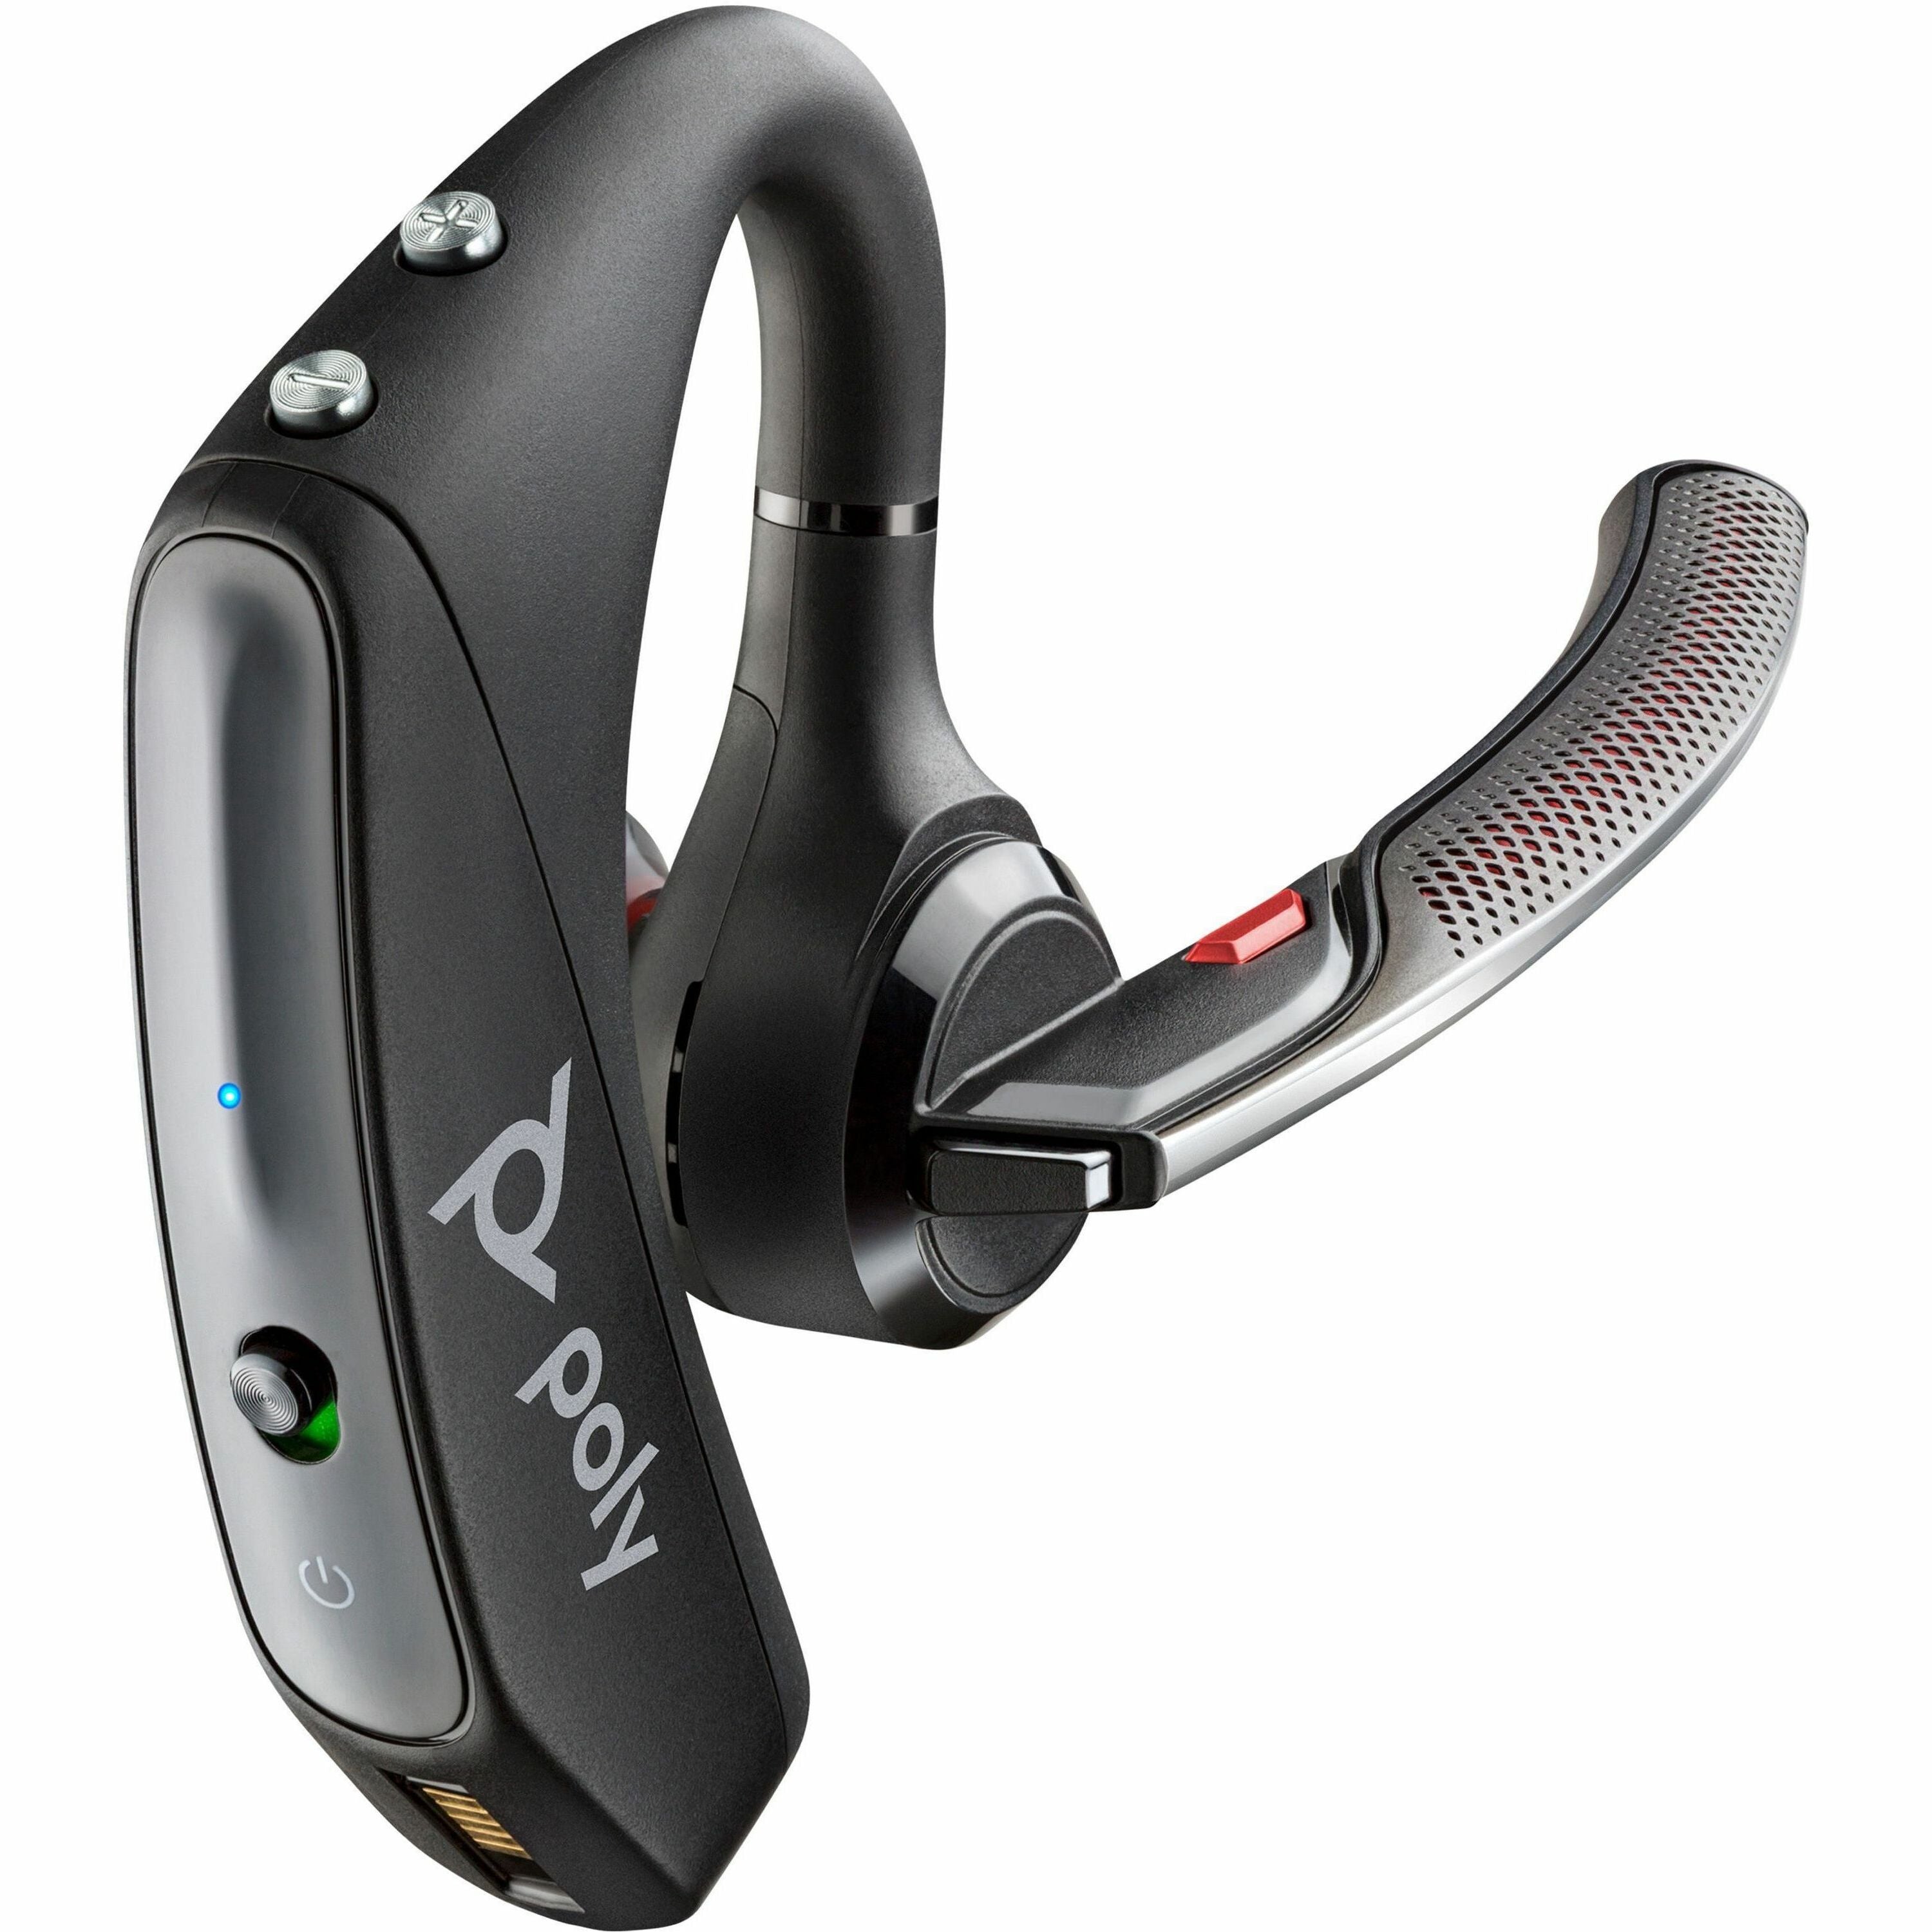 Poly Voyager 5200 UC USB-A Bluetooth Headset +BT700 Adapter - Google Assistant, Siri - Mono - Wireless - Bluetooth - 98.4 ft - 32 Ohm - 100 Hz - 20 kHz - Over-the-ear, Earbud - Monaural - In-ear - 7.12 ft Cable - Omni-directional, MEMS Technology, No - 1